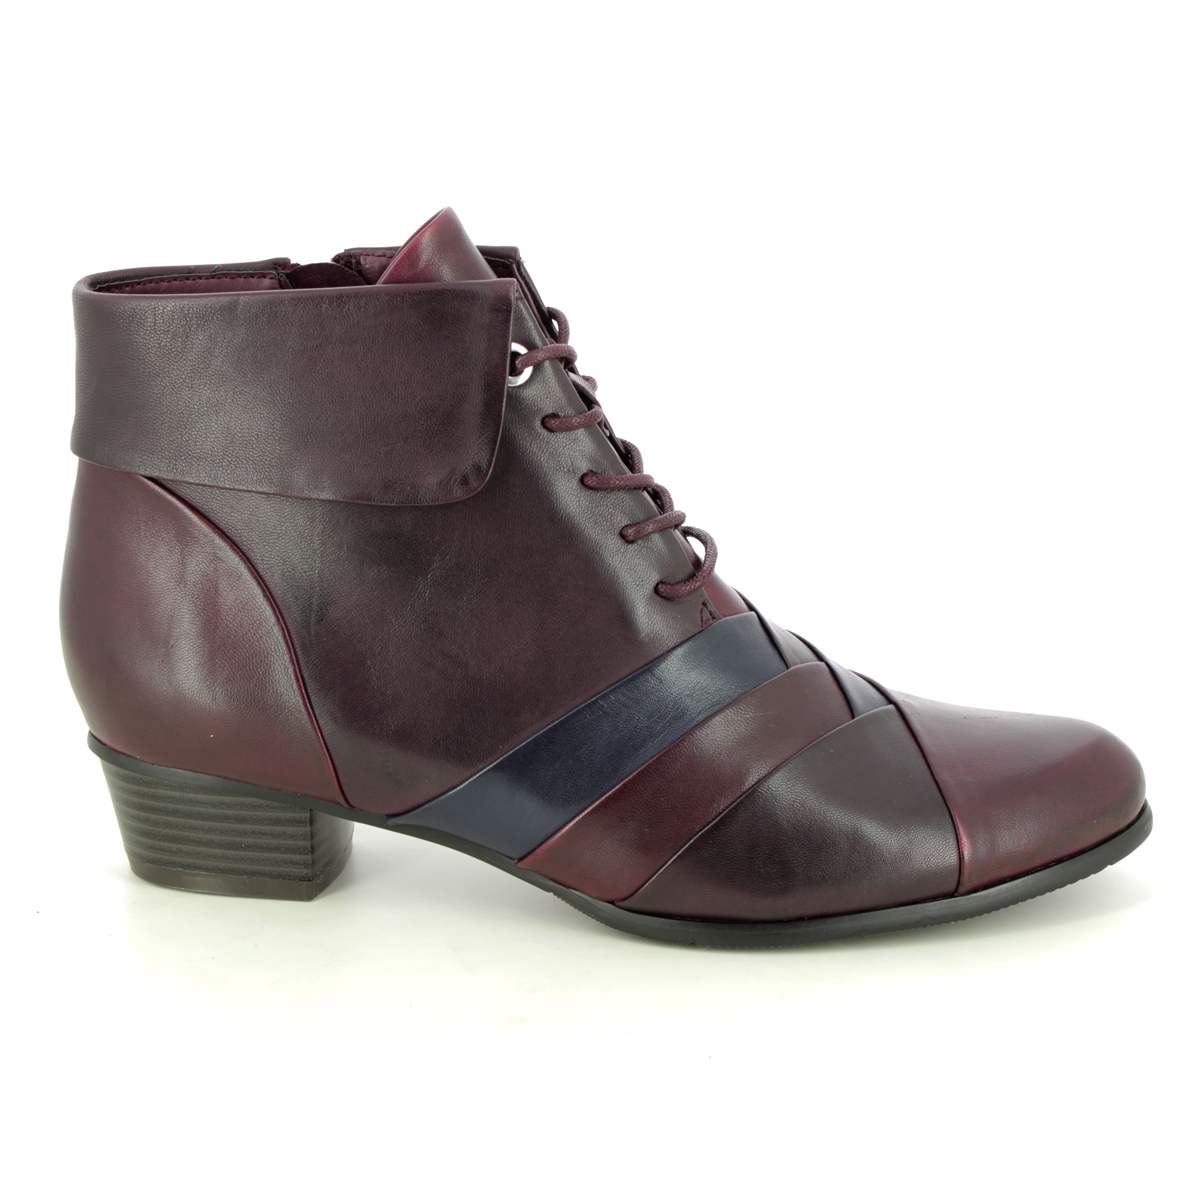 Regarde le Ciel Stefany 374 Wine leather Womens Lace Up Boots 0374-6418